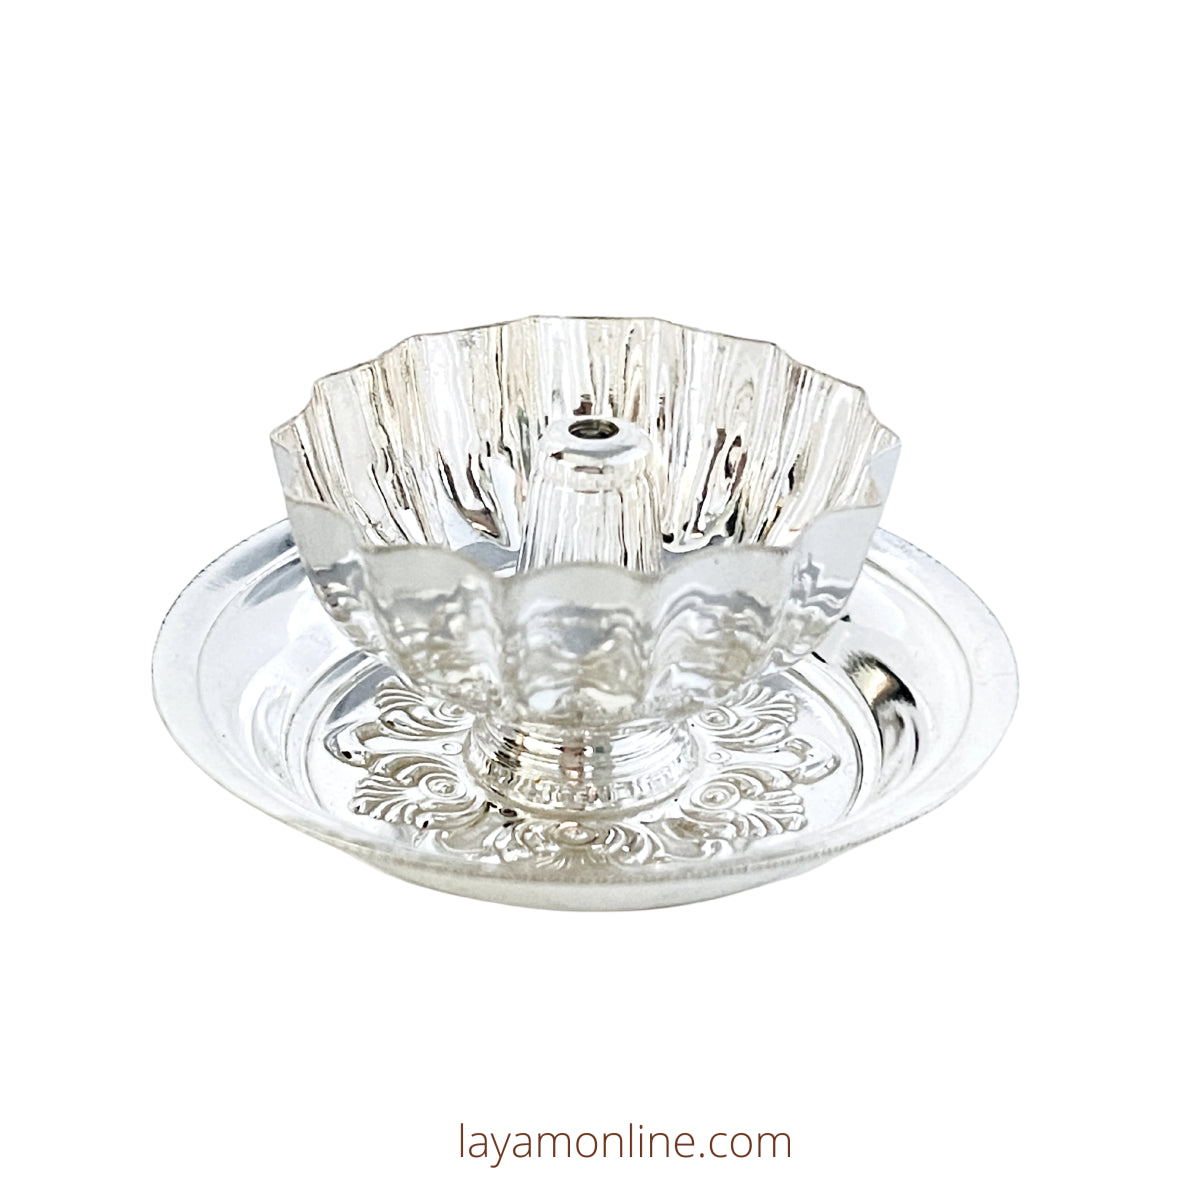 Silver Lotus Flower Deepam with Base Plate